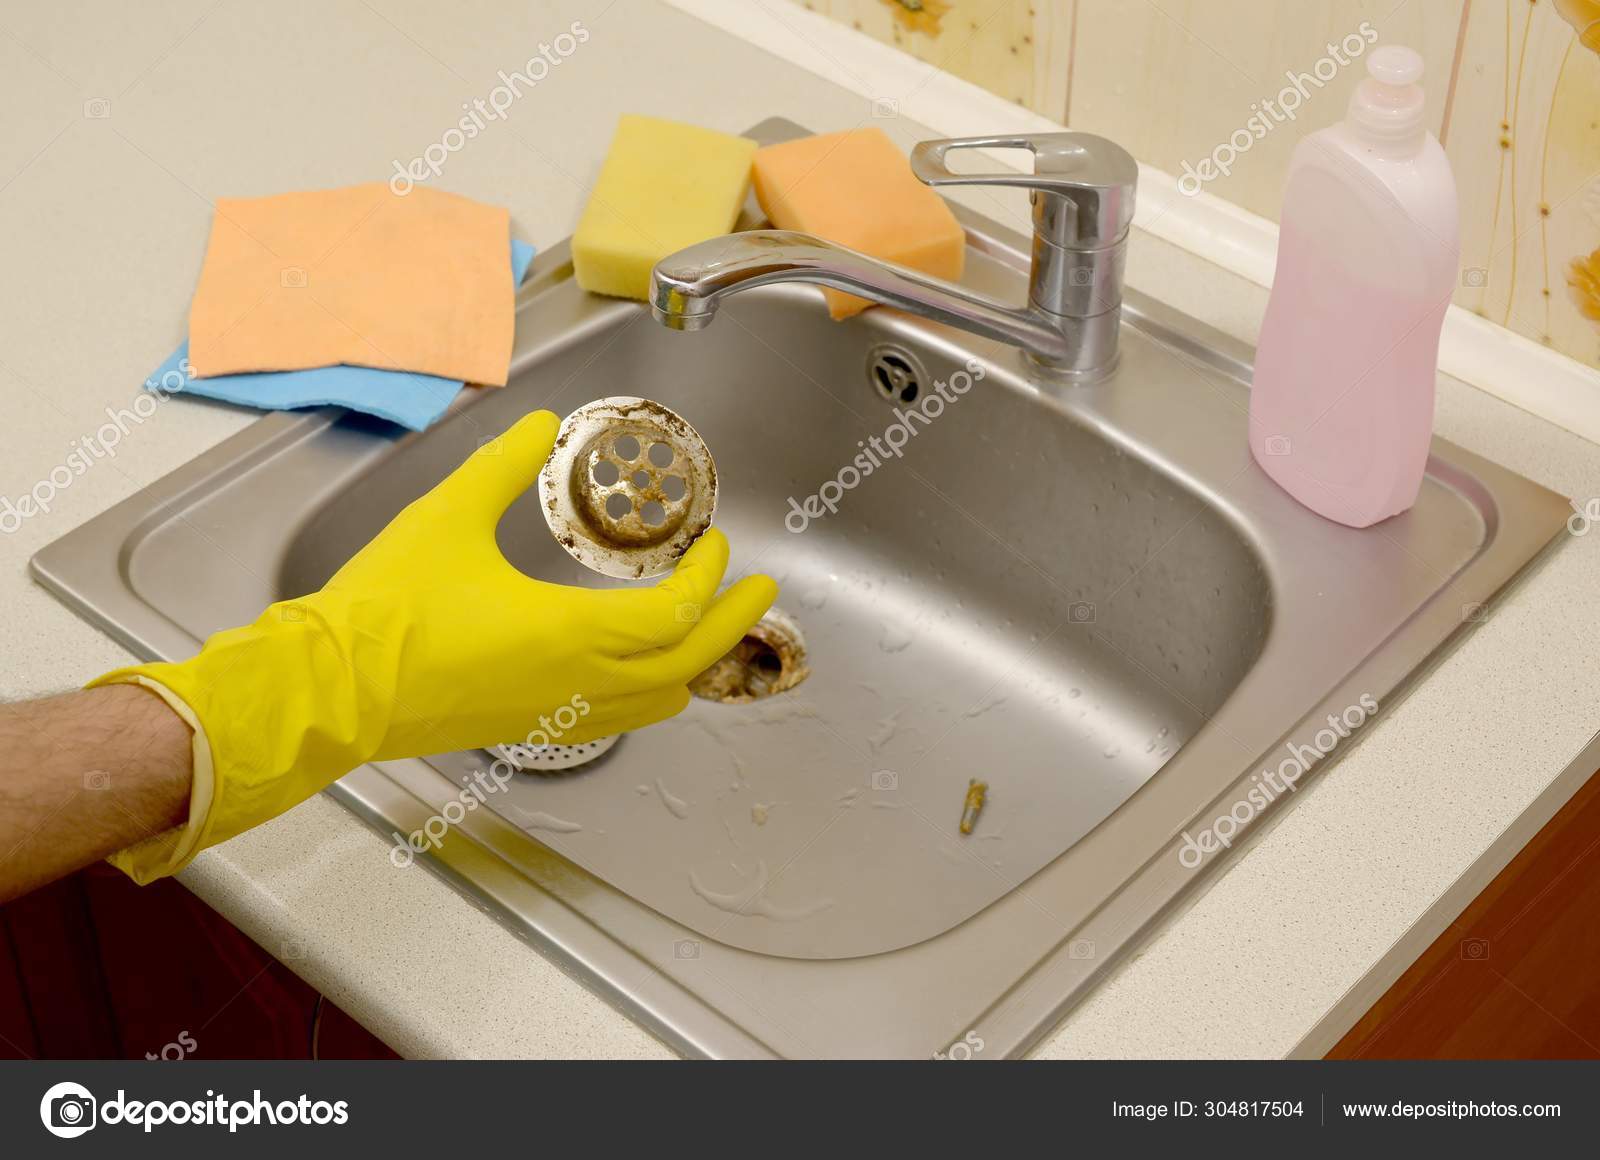 Cleaner in rubber gloves shows waste in the plughole protector of